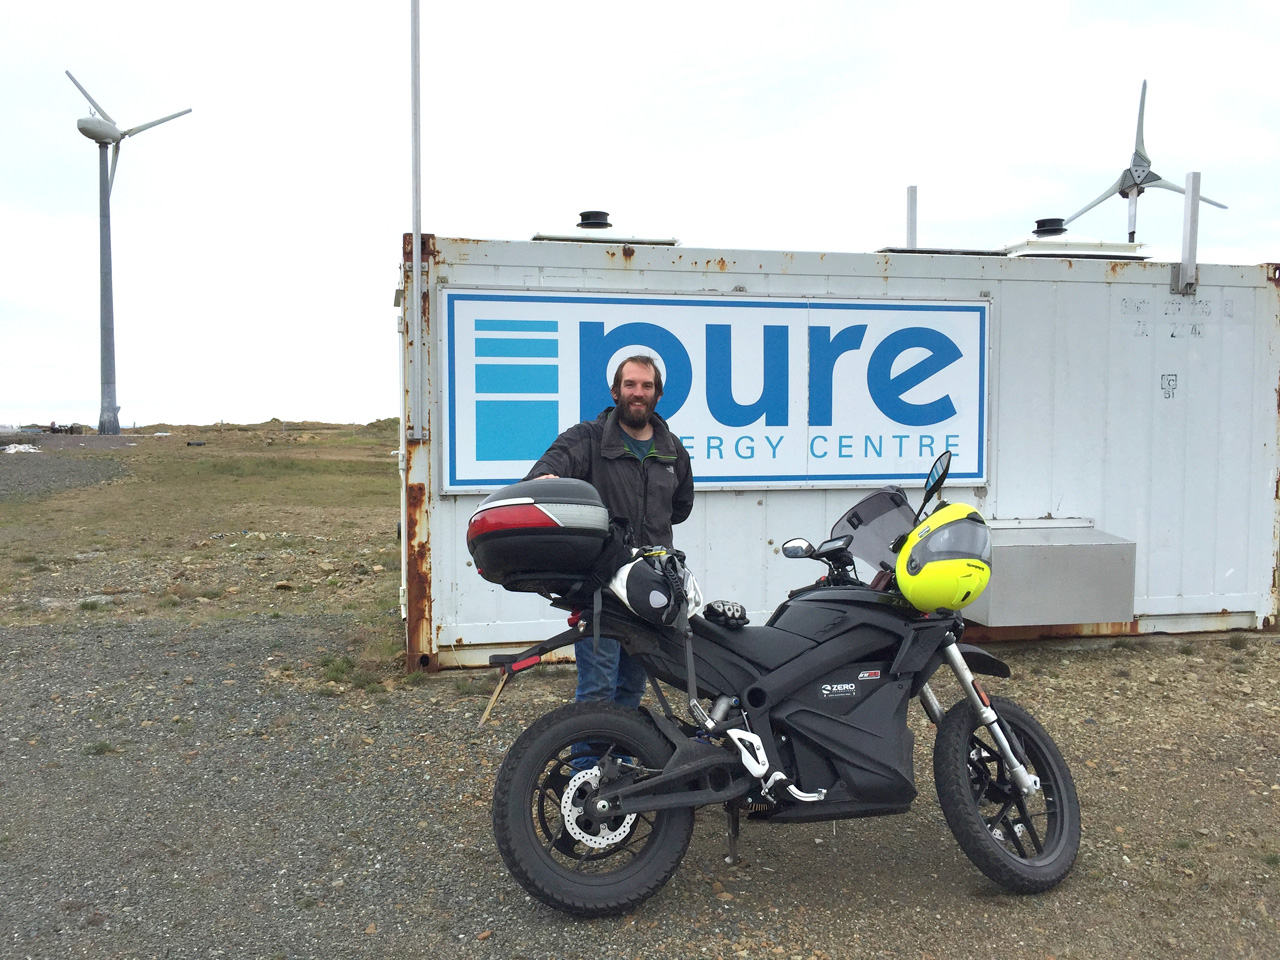 Ross Gazey of the Pure Energy Centre with John Chivers' Zero DSR electric motorcycle at the Pure Energy Centre, Unst, Shetland.